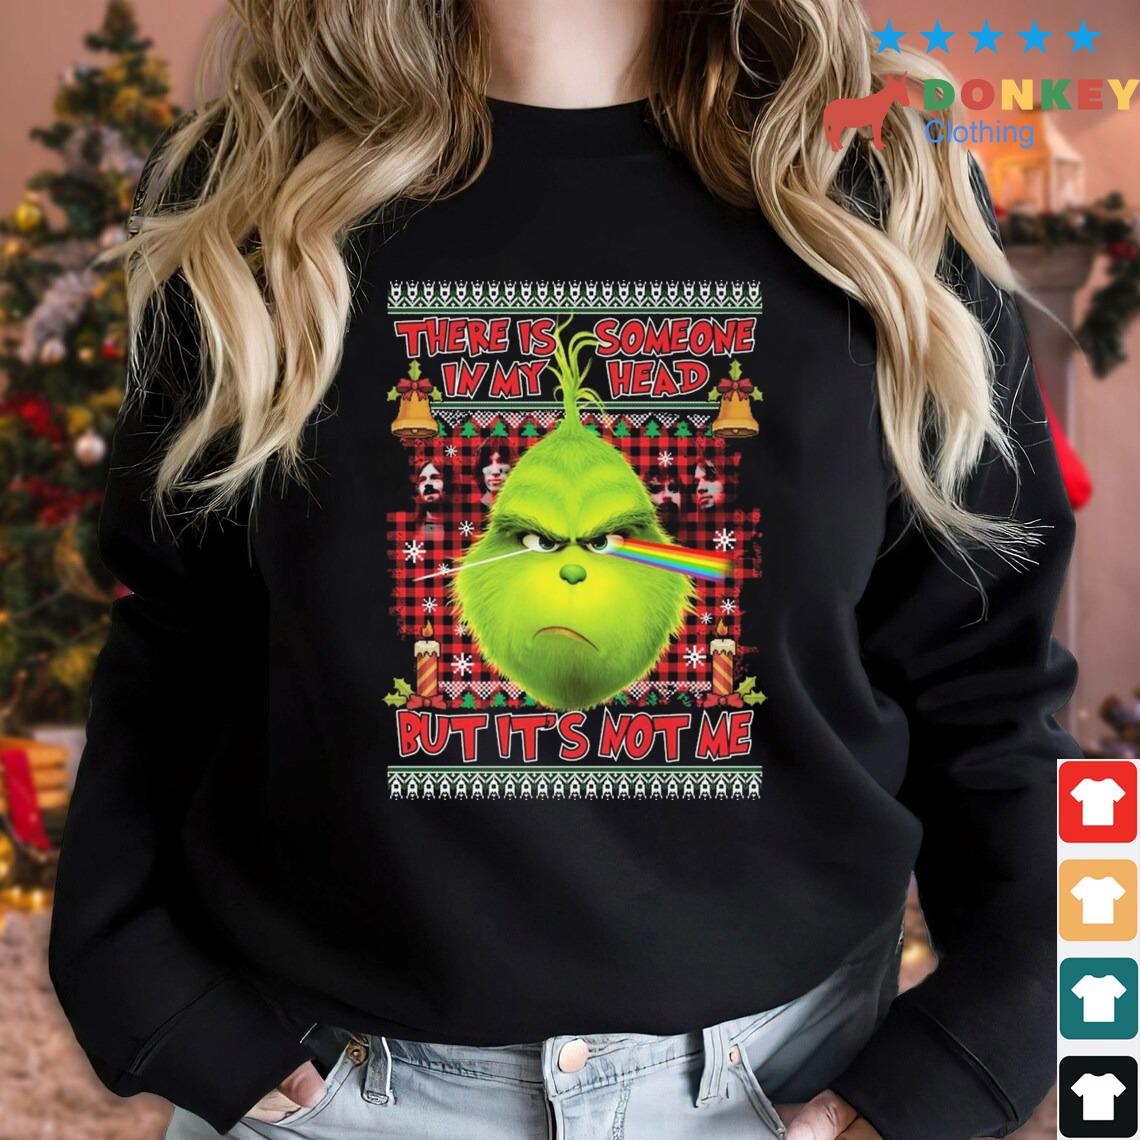 The Grinch Pink Floyd There Is Someone In My Head But It’s Not Me Ugly Christmas Sweater